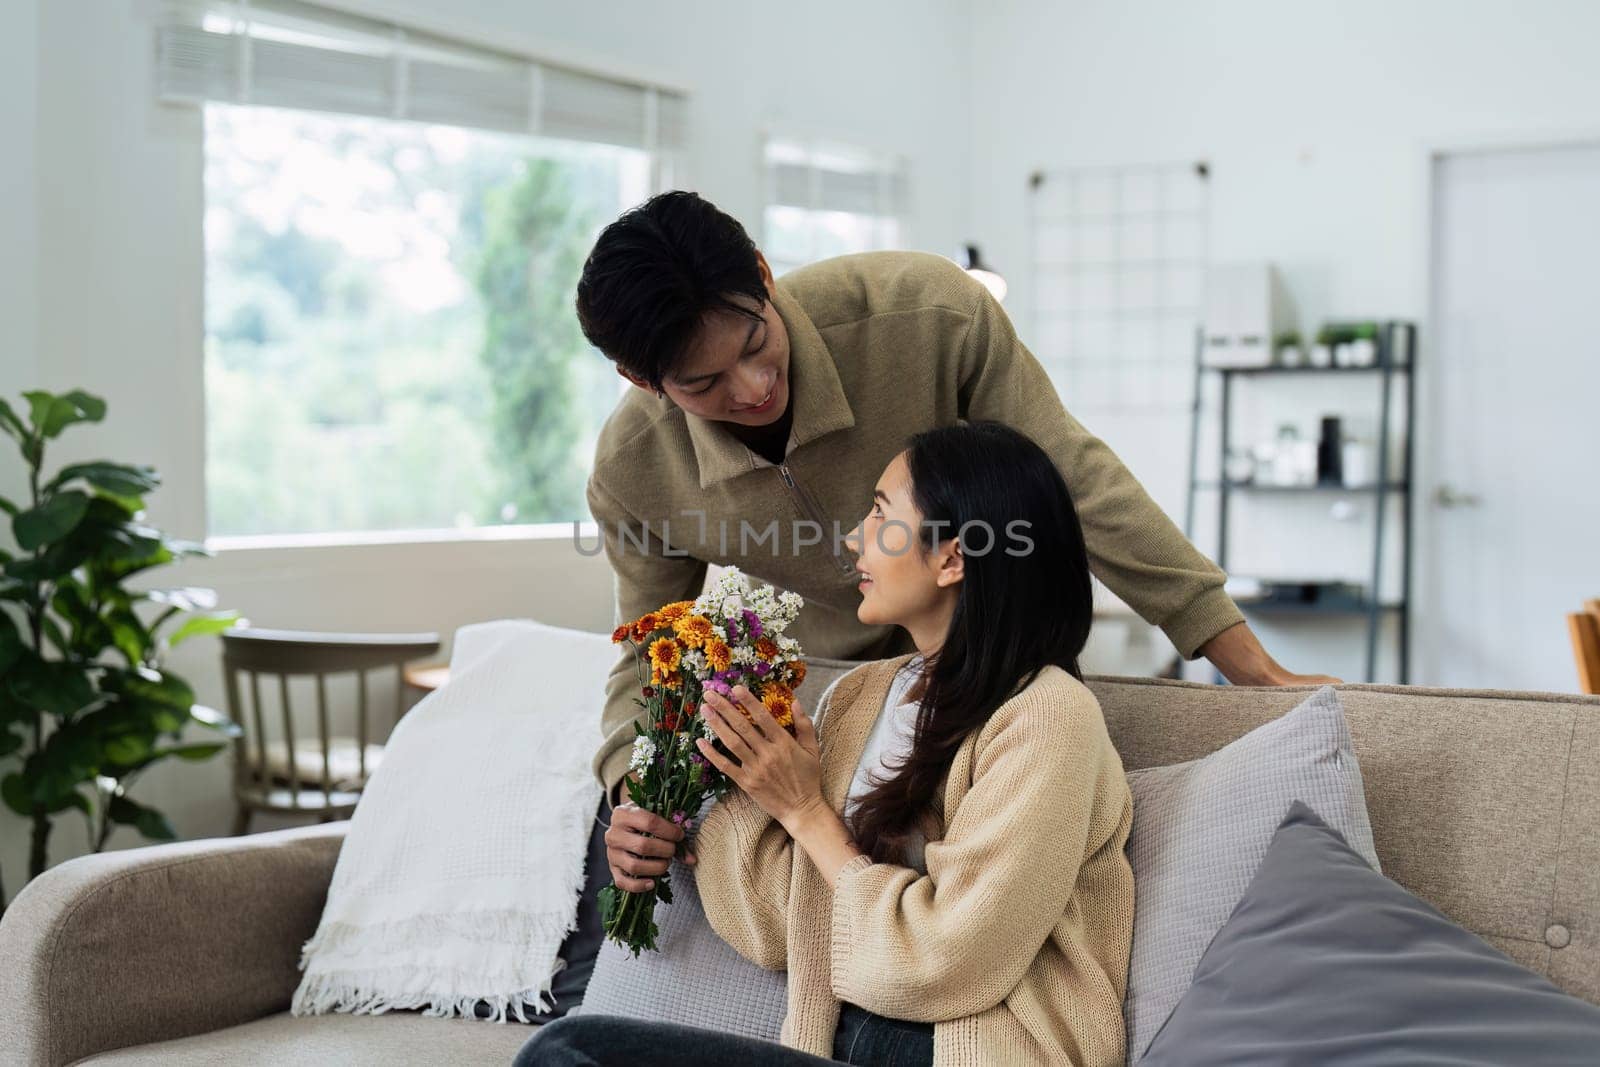 Young couple Hug and giving flower on Valentine's Day. Romantic day together. Valentine's Day concept.